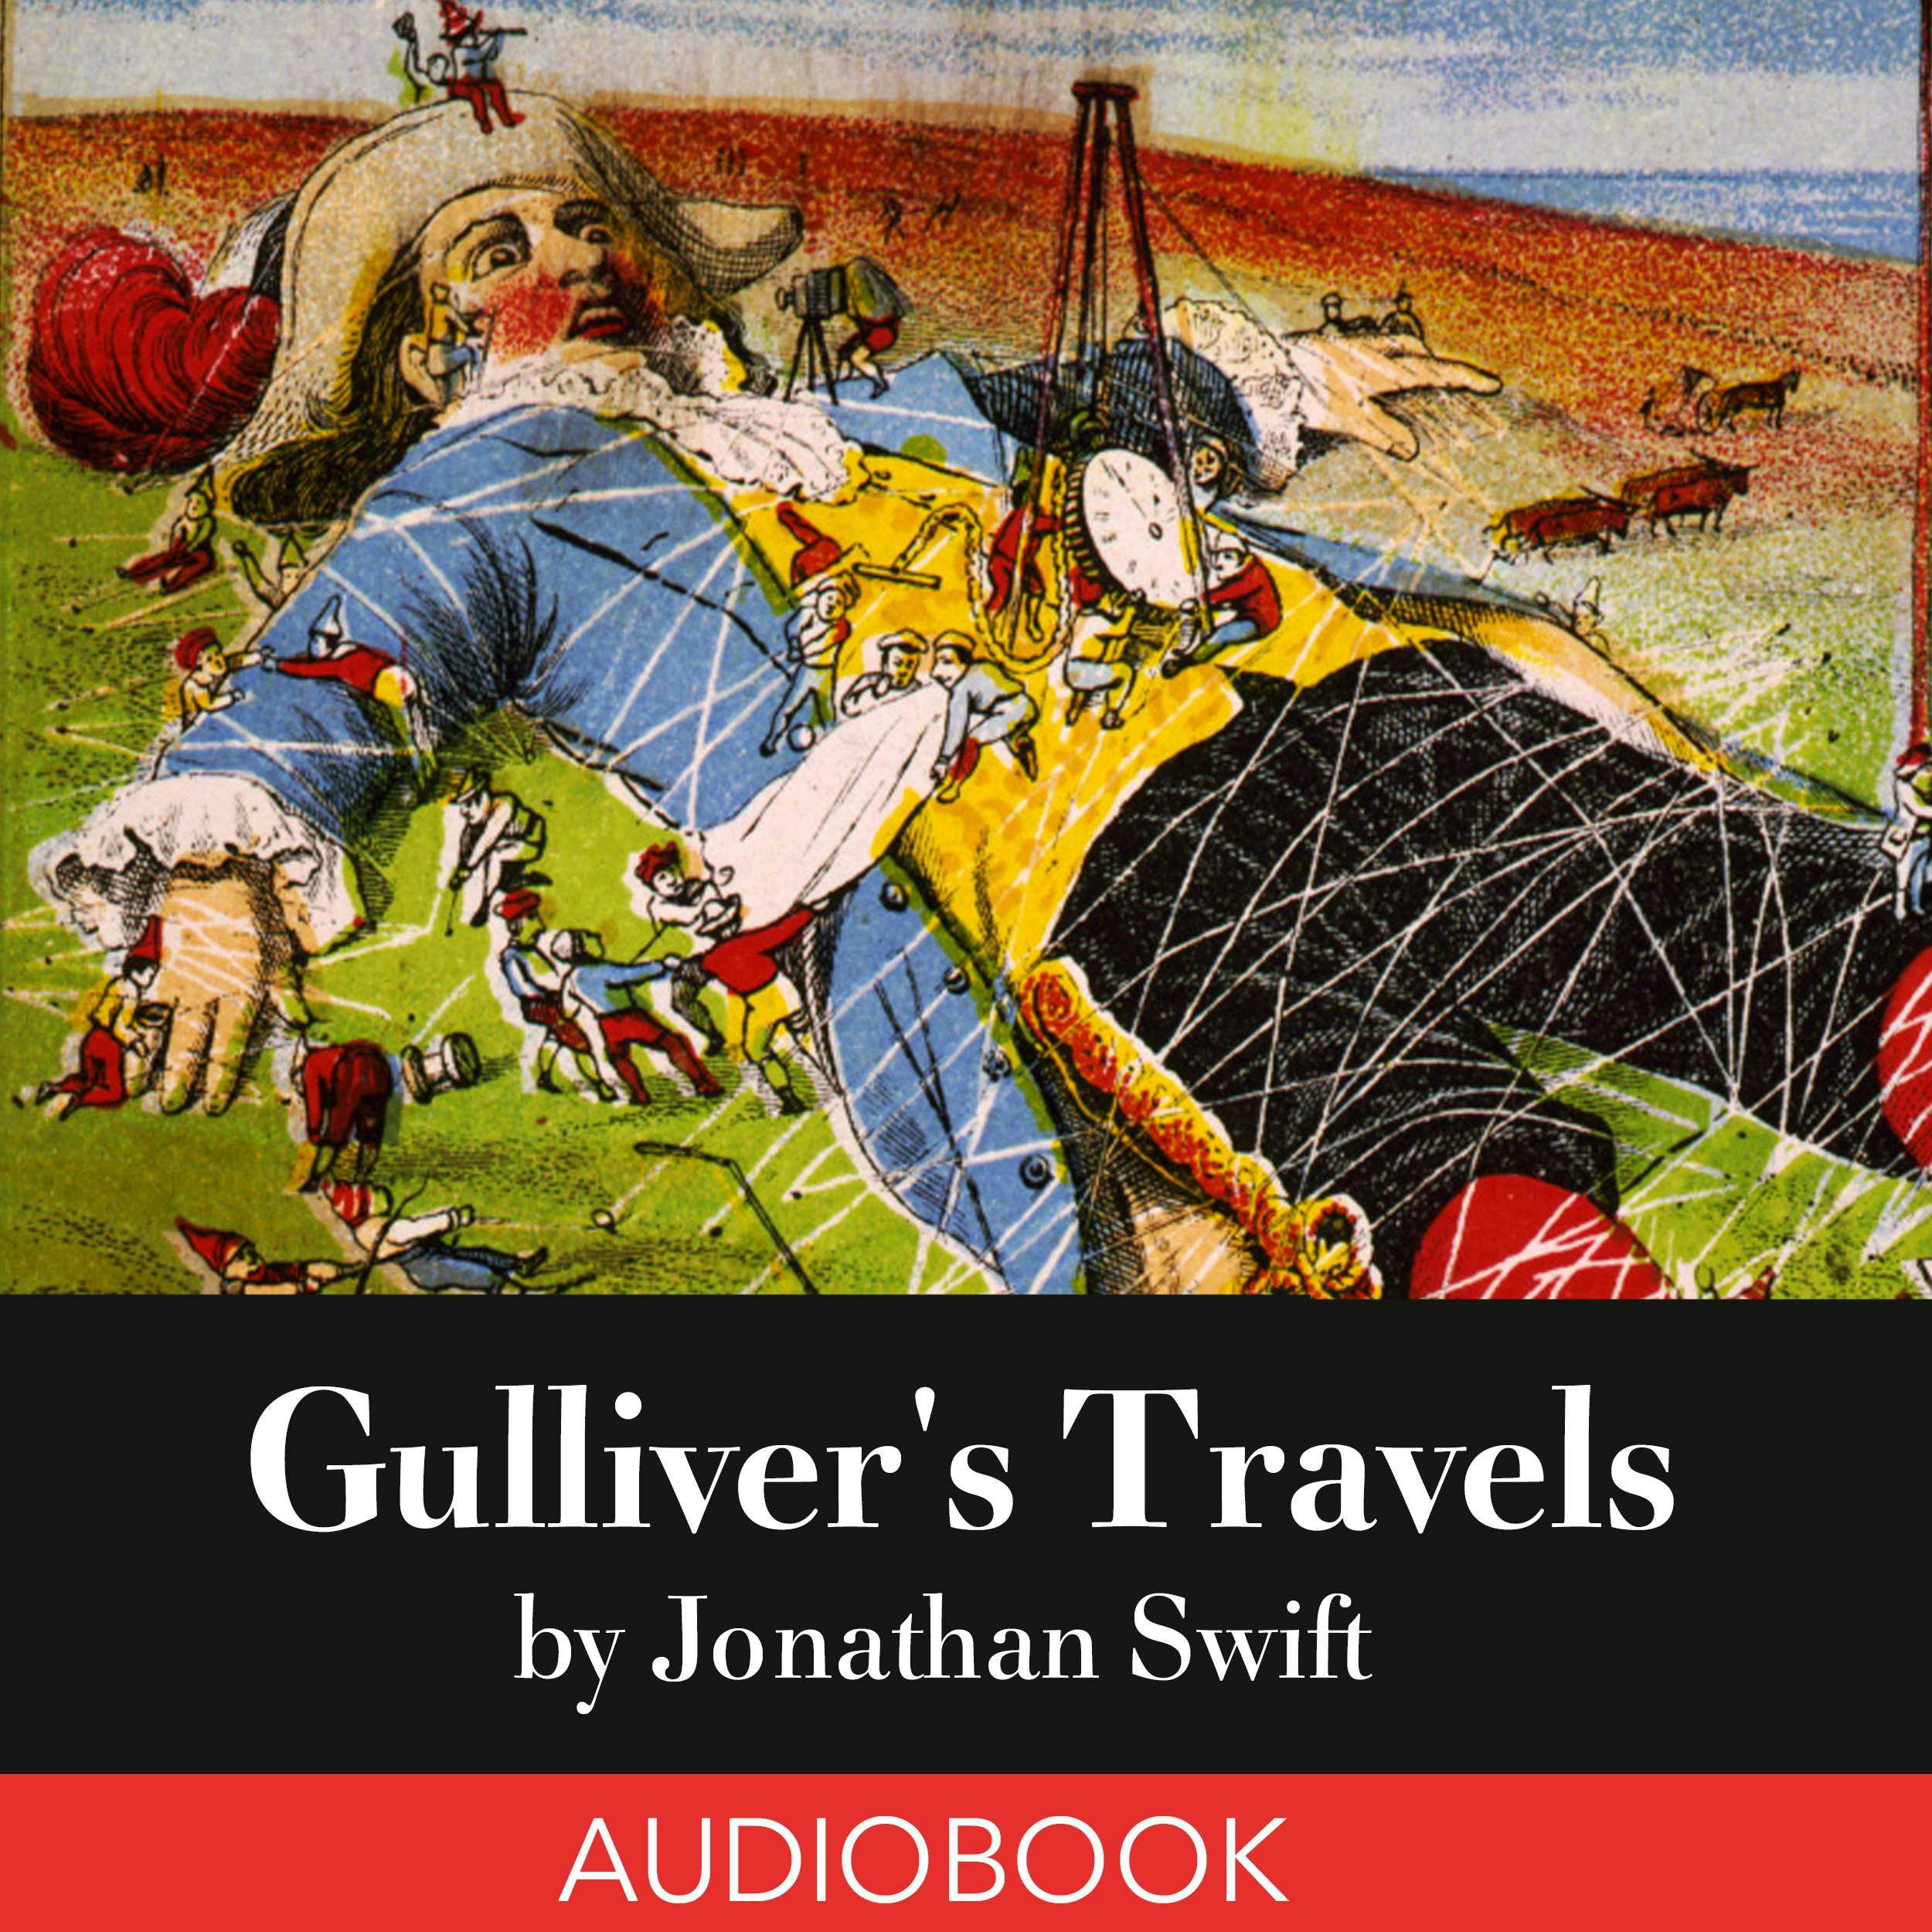 Gulliver's Travels - undefined